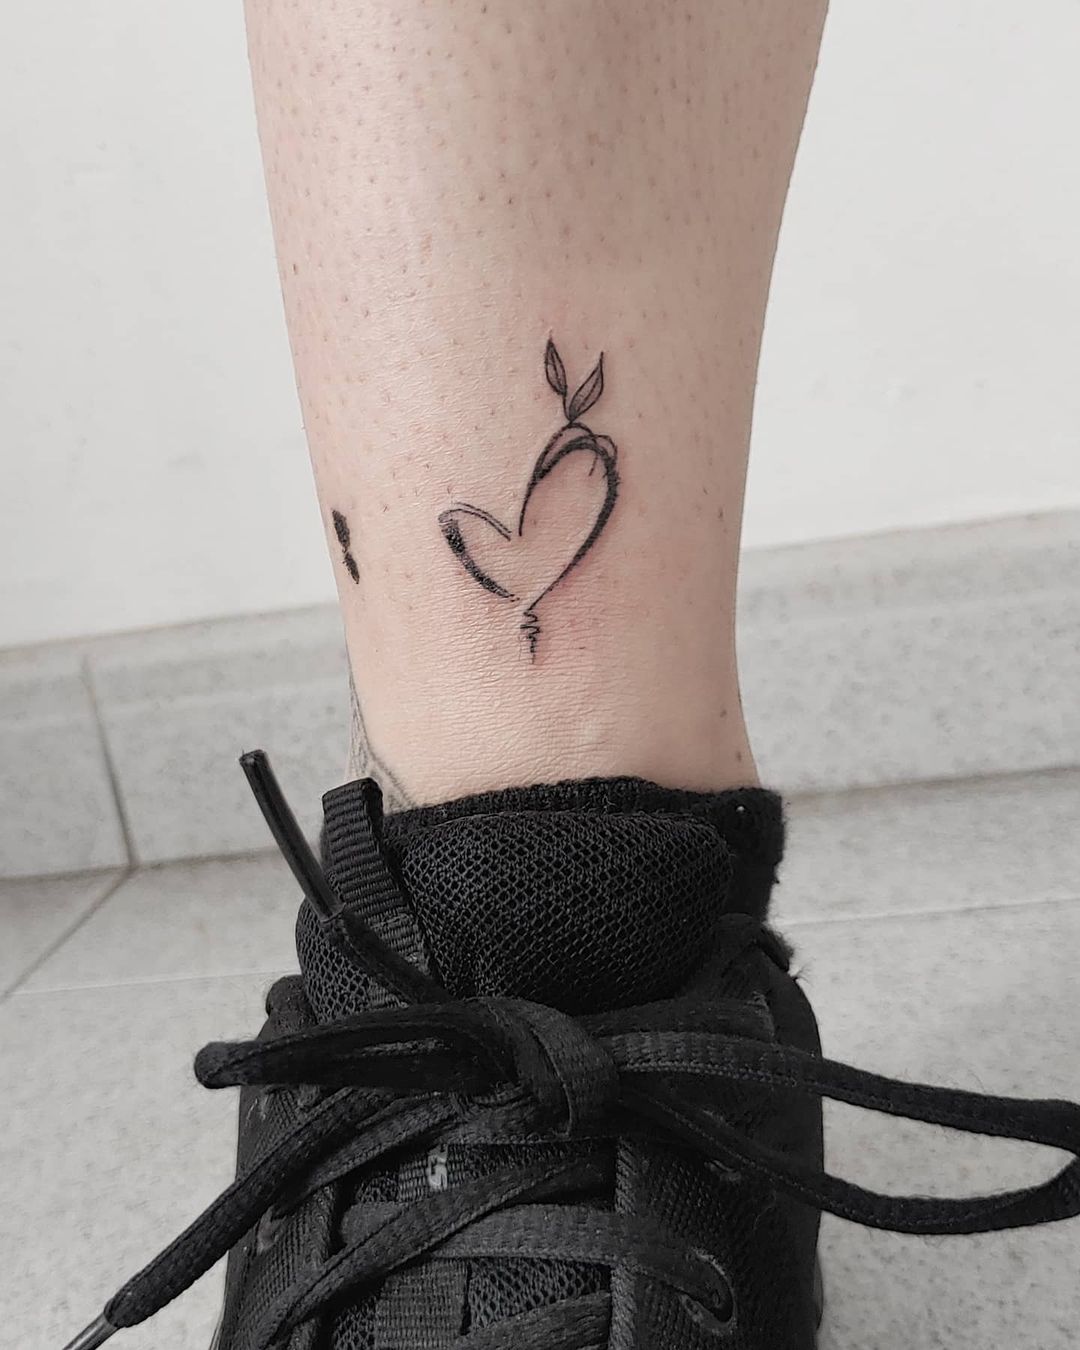 Tiny single needle heart tattoo located on the ankle